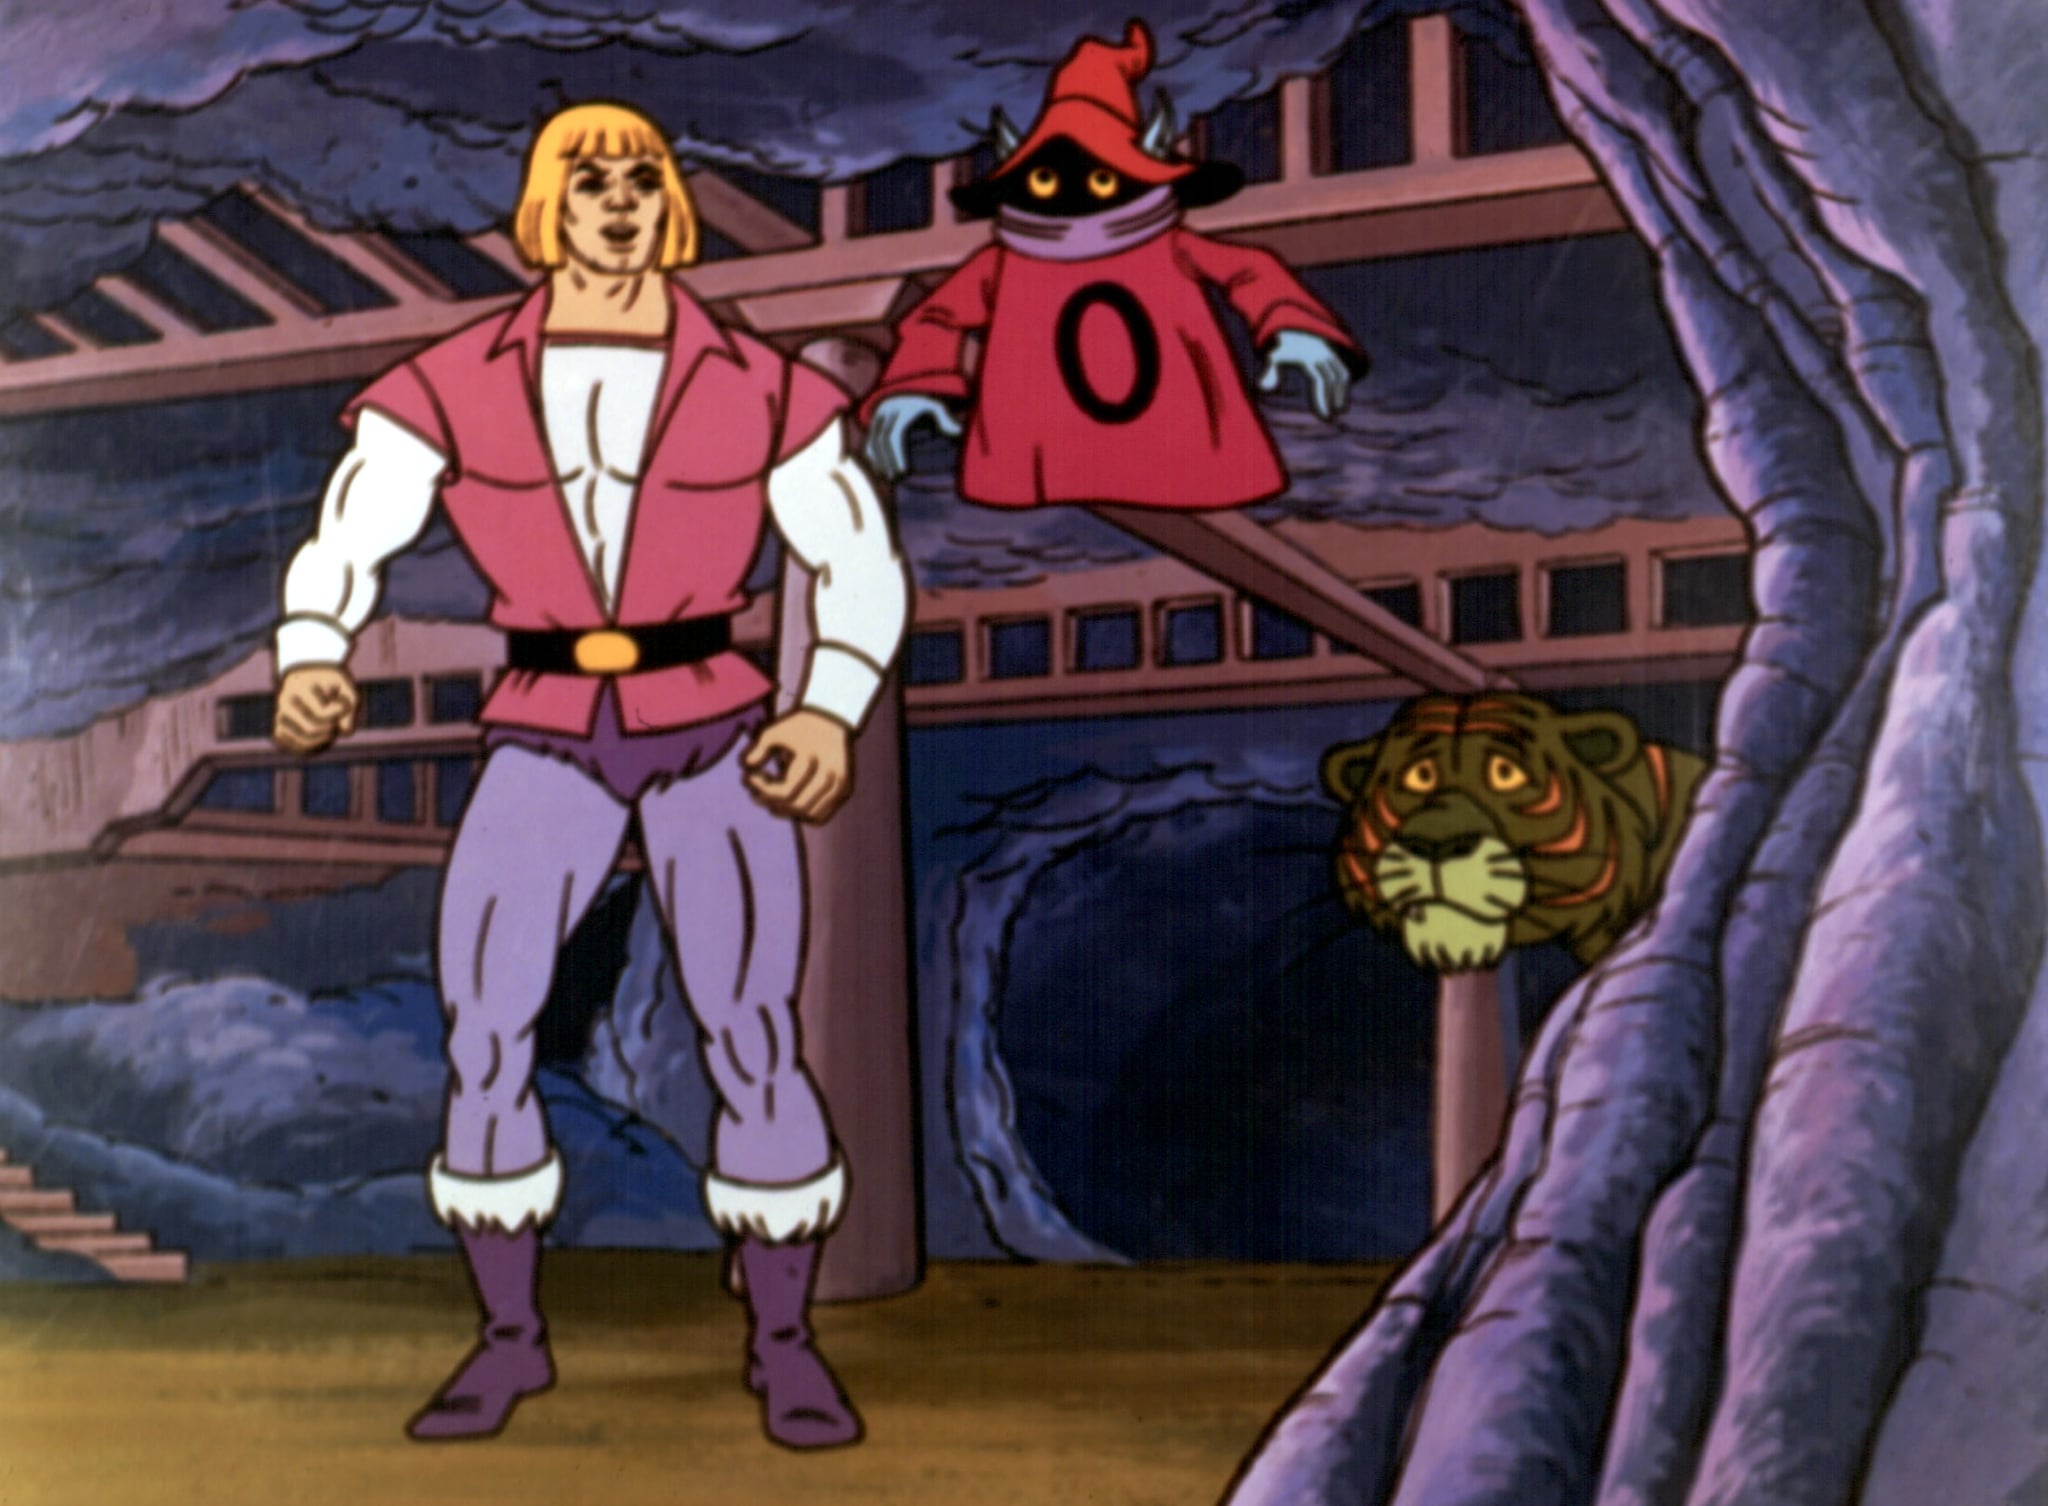  He-Man and the Masters of the Universe: The Complete